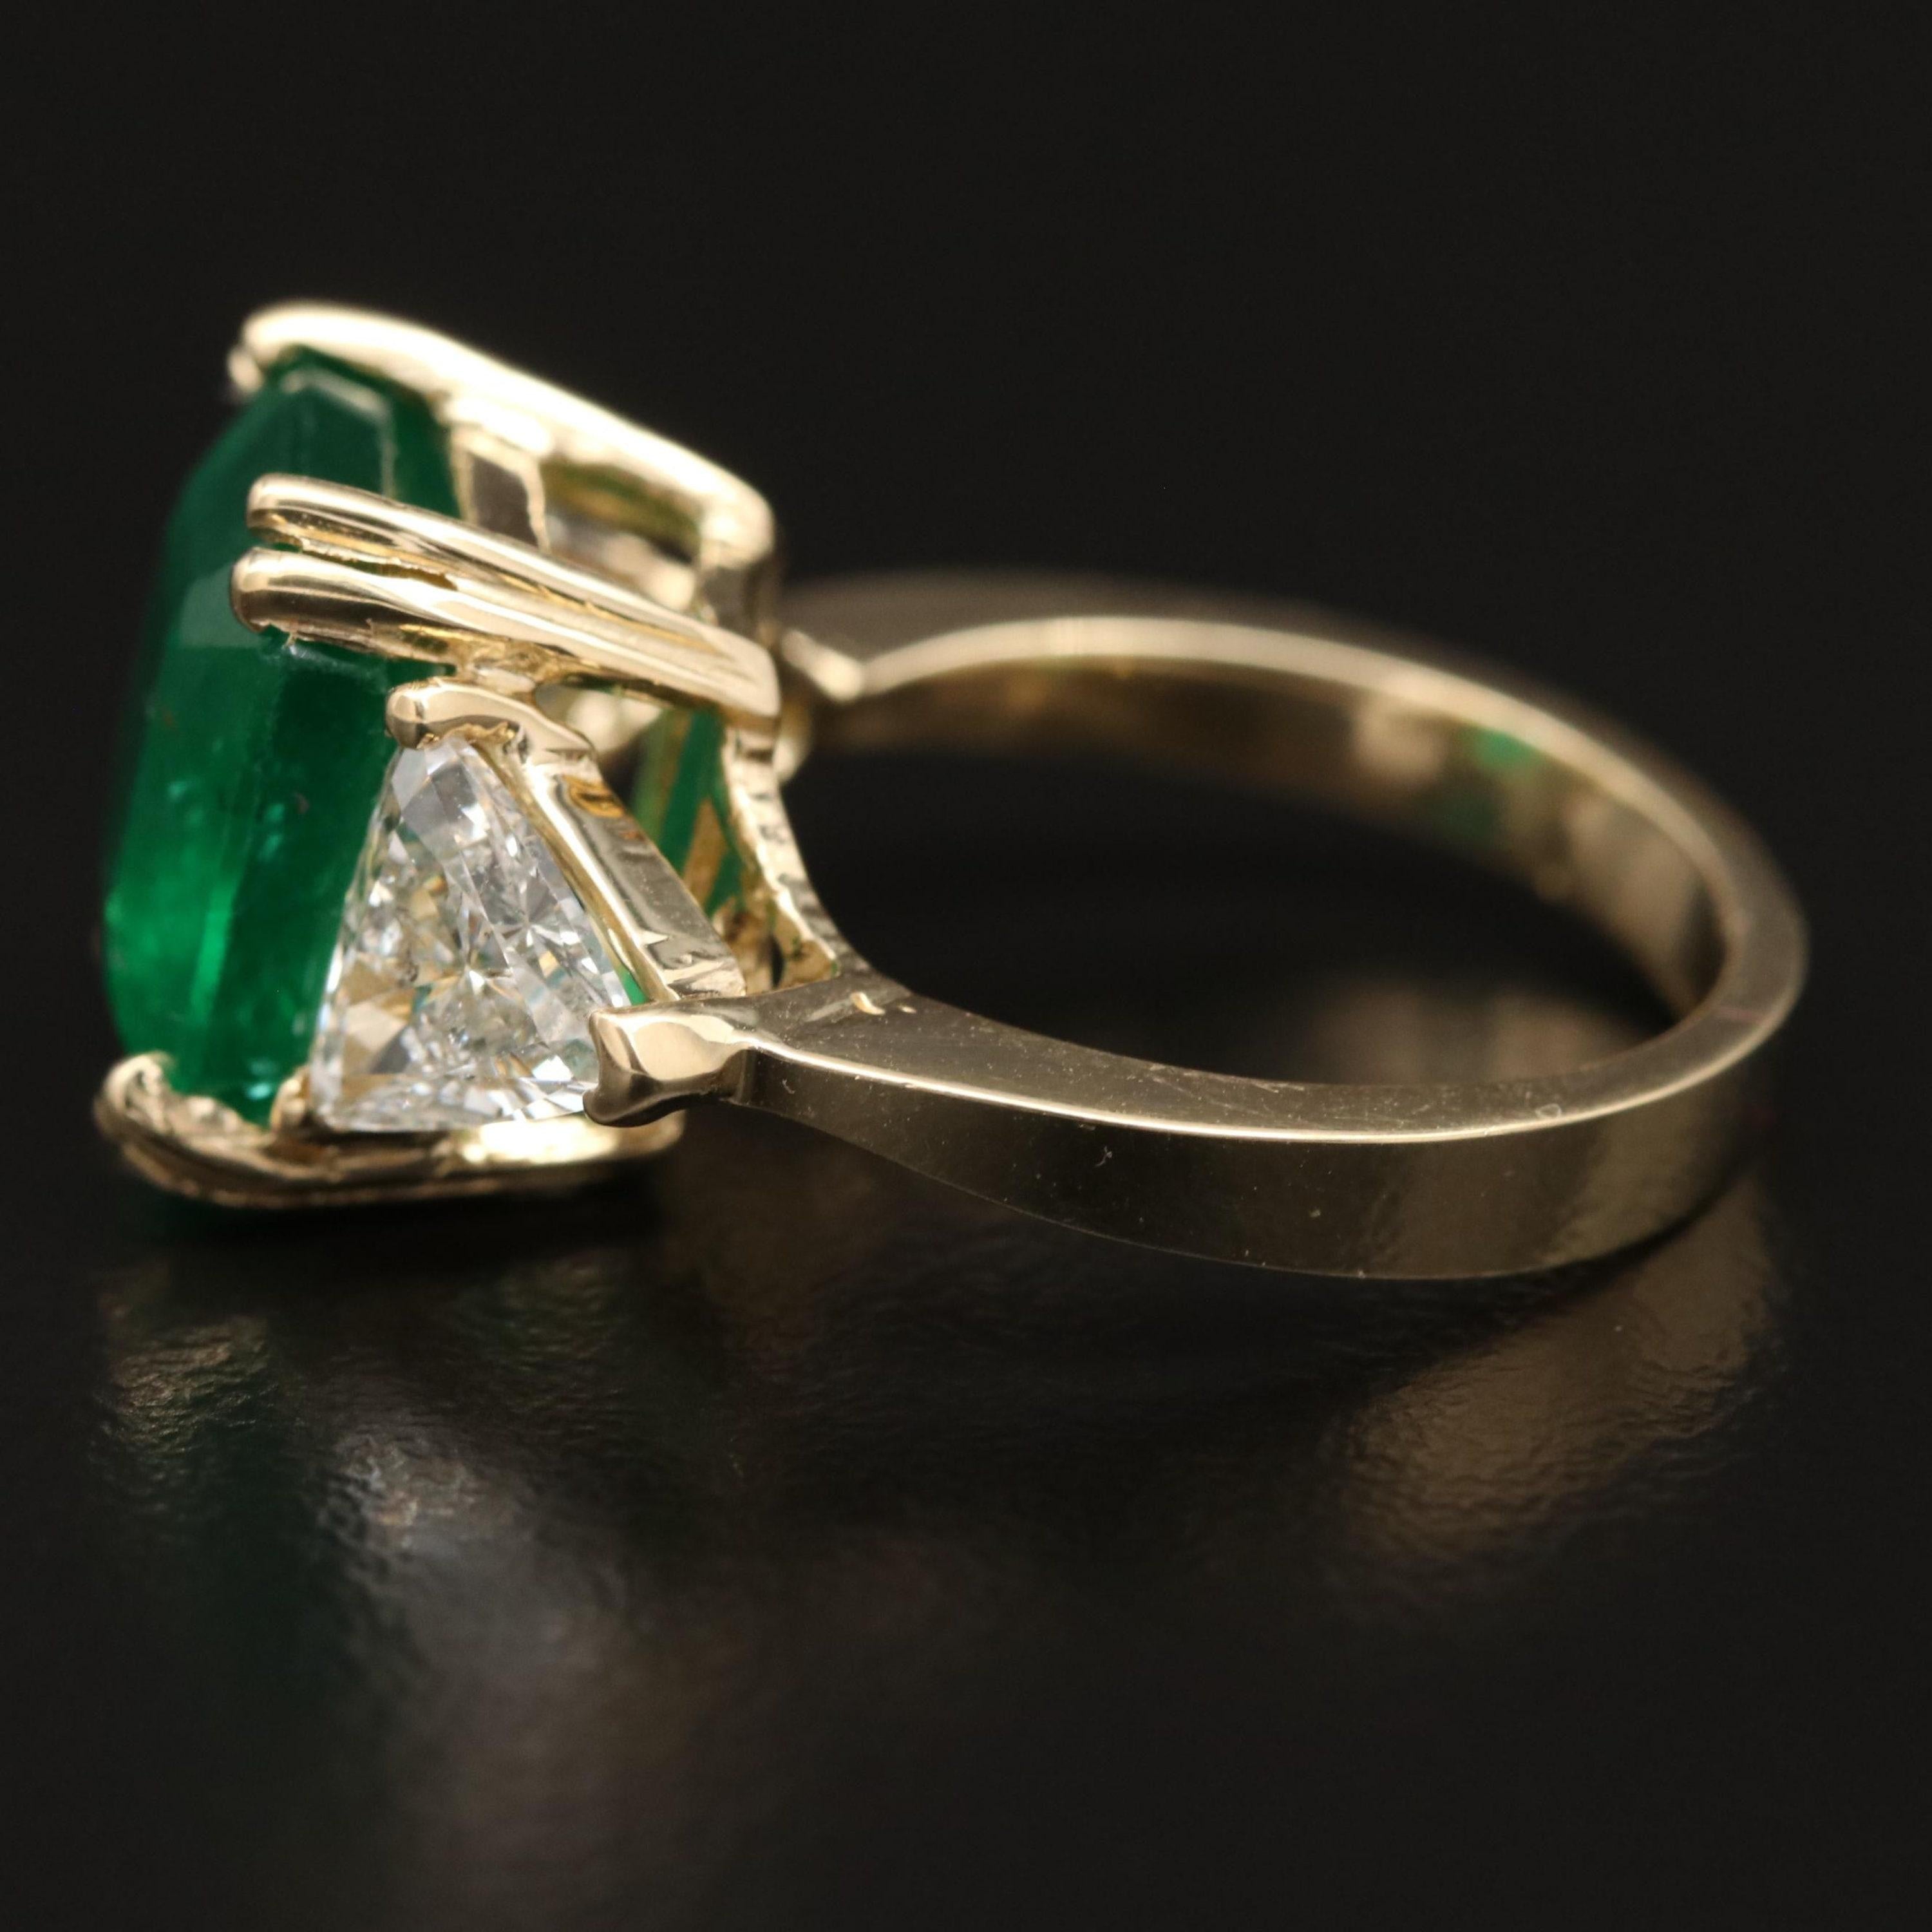 For Sale:  5 Carat Three Stone Emerald Diamond Engagement Ring Antique Bridal Cocktail Ring 5